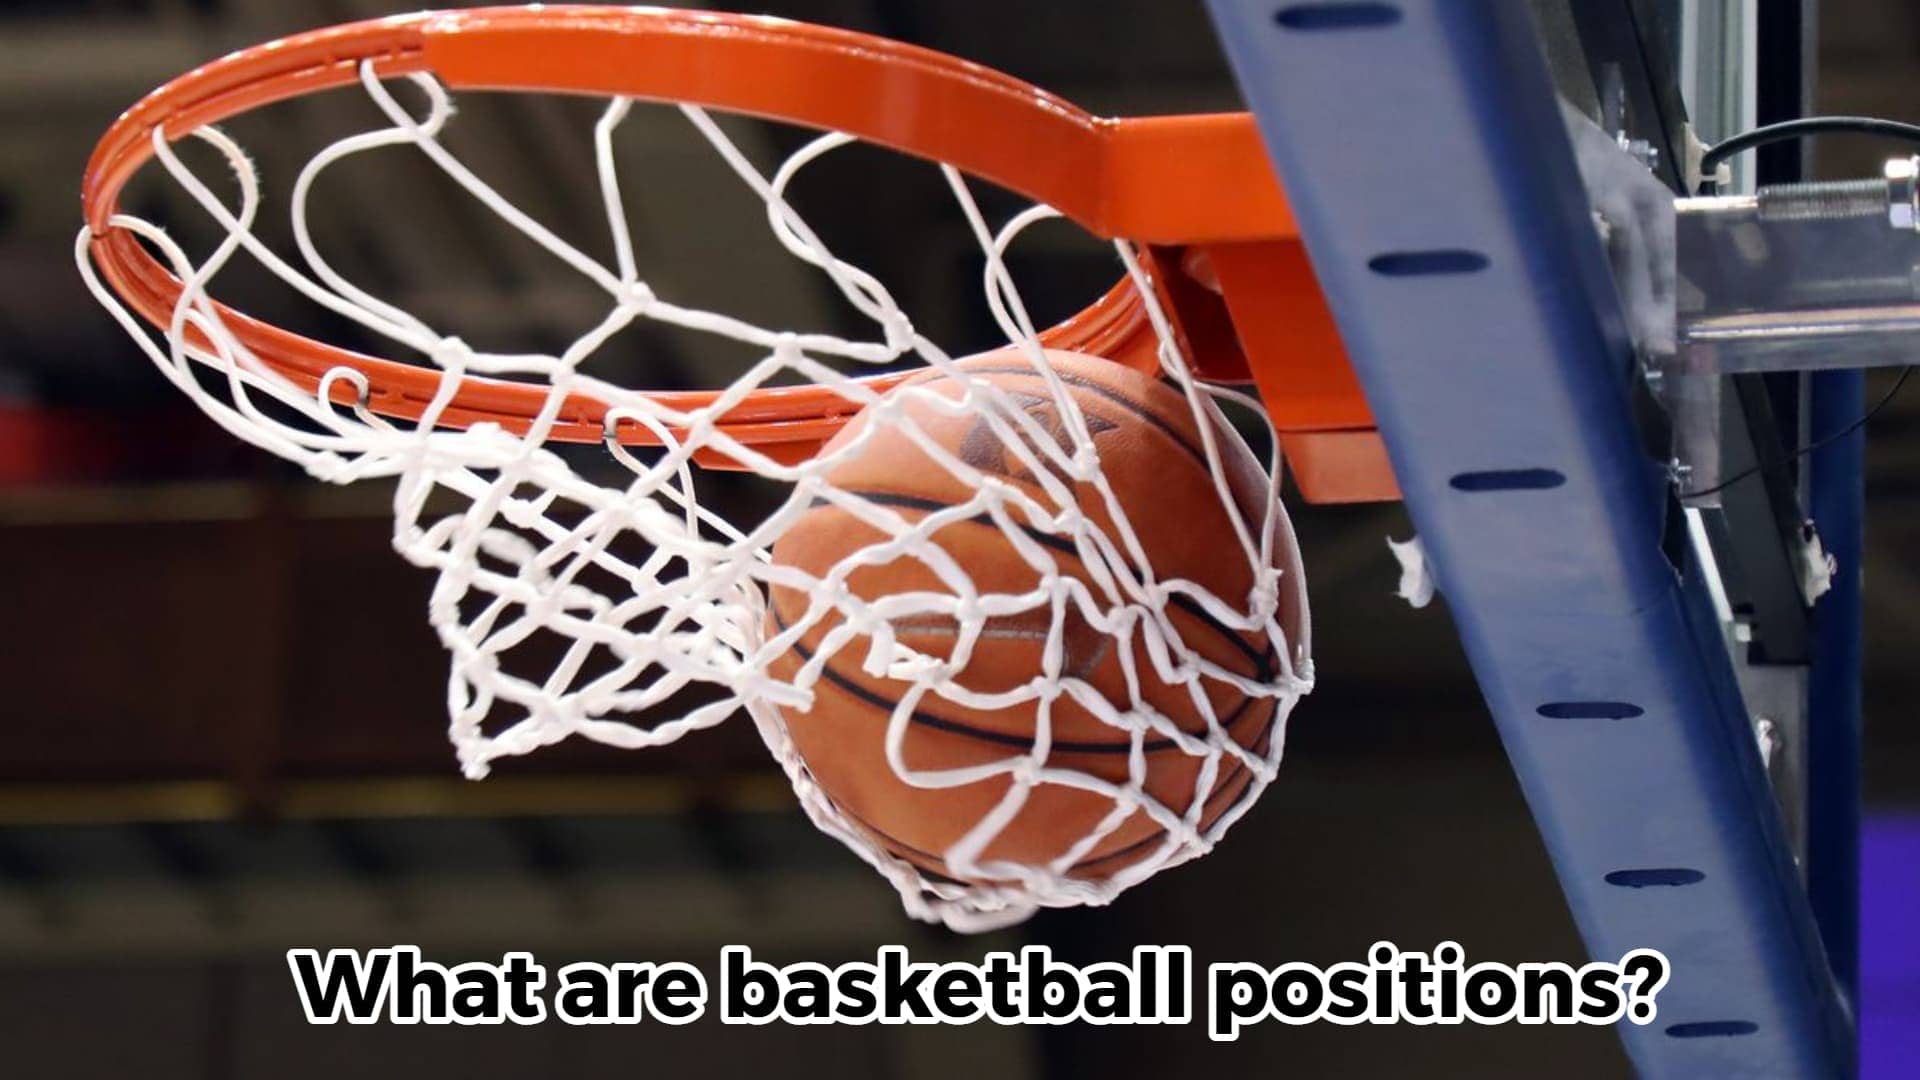 what are basketball positions